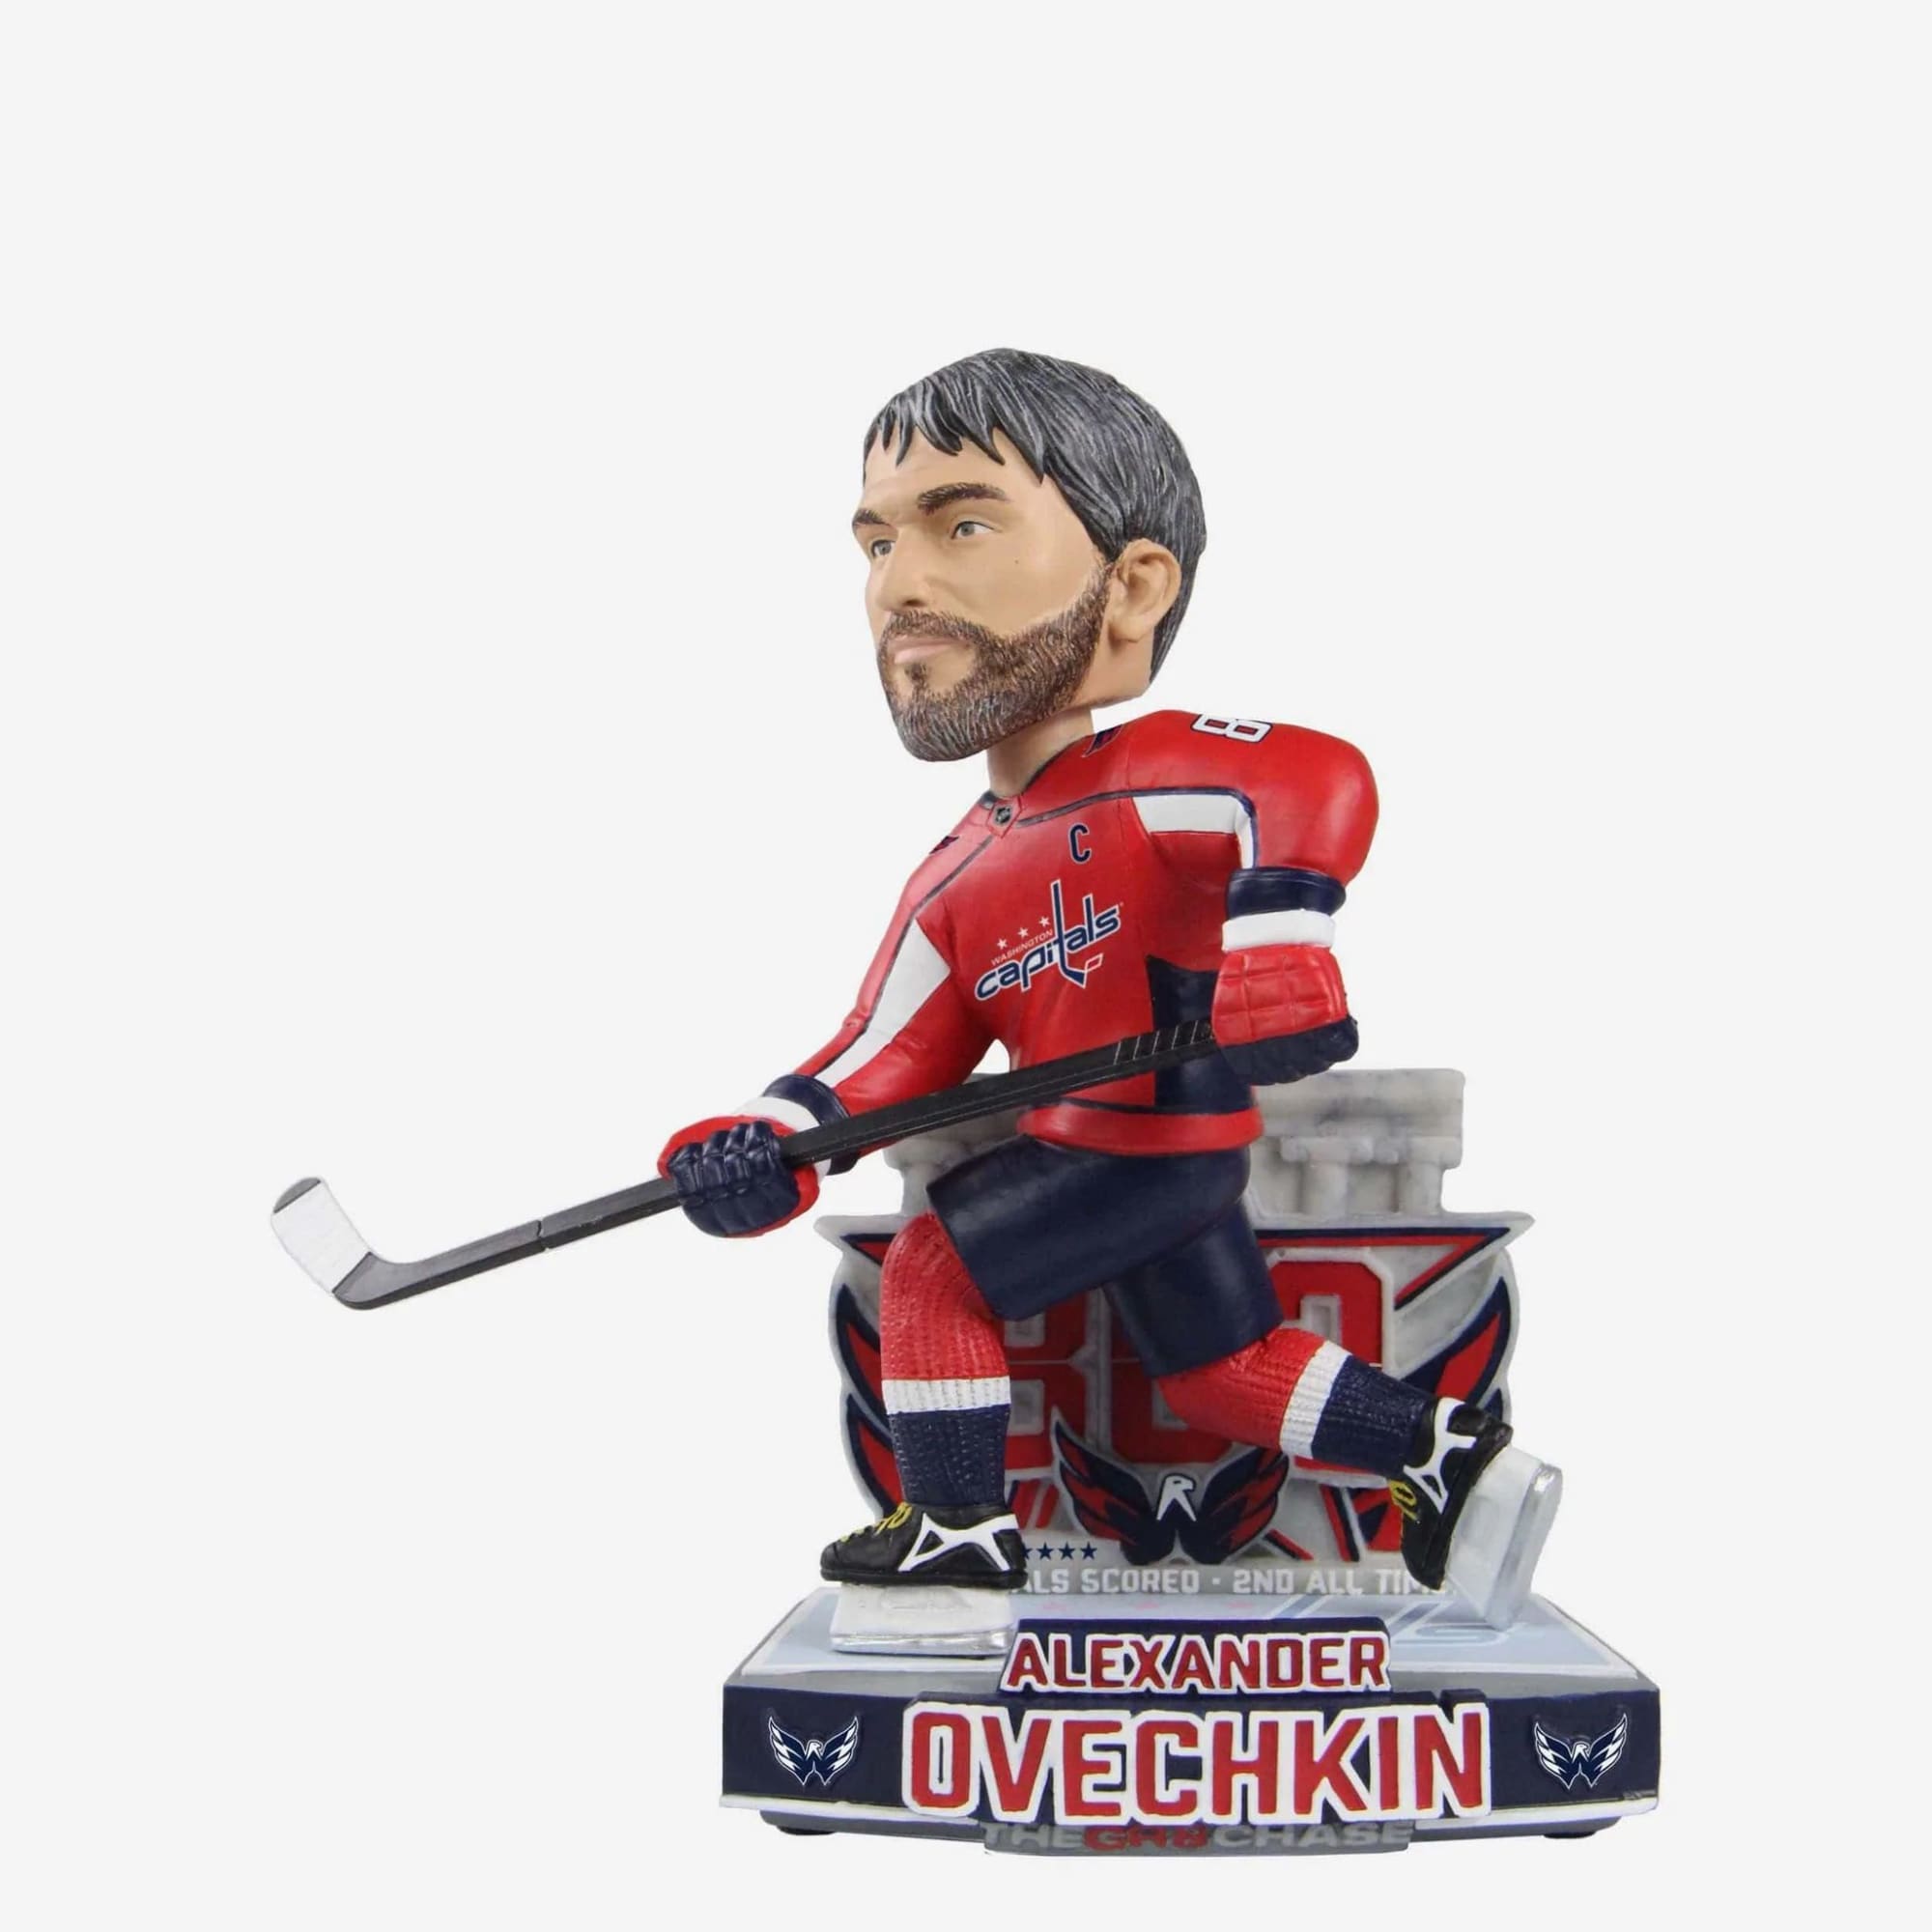 nhl: Washington Capitals' Alex Ovechkin secures another milestone